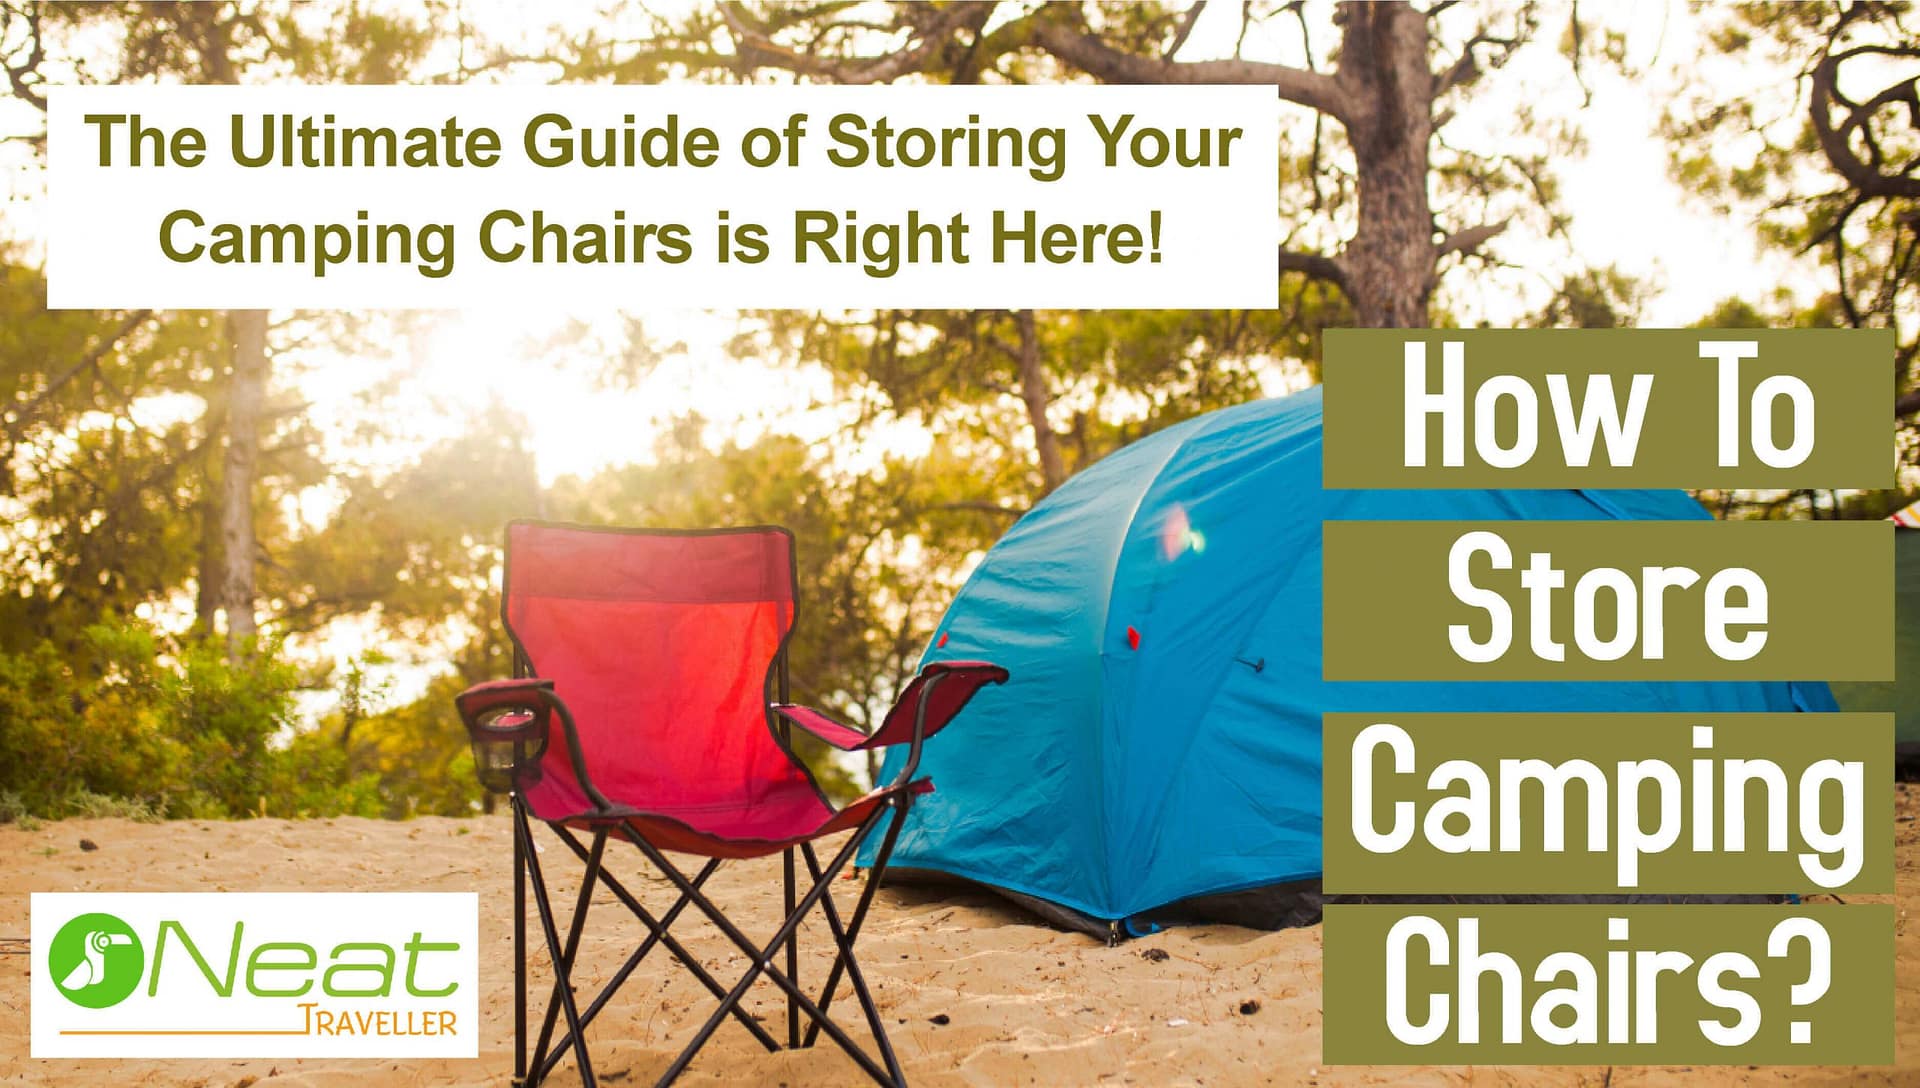 The Ultimate Guide of Storing Your Camping Chairs is Right Here!!!